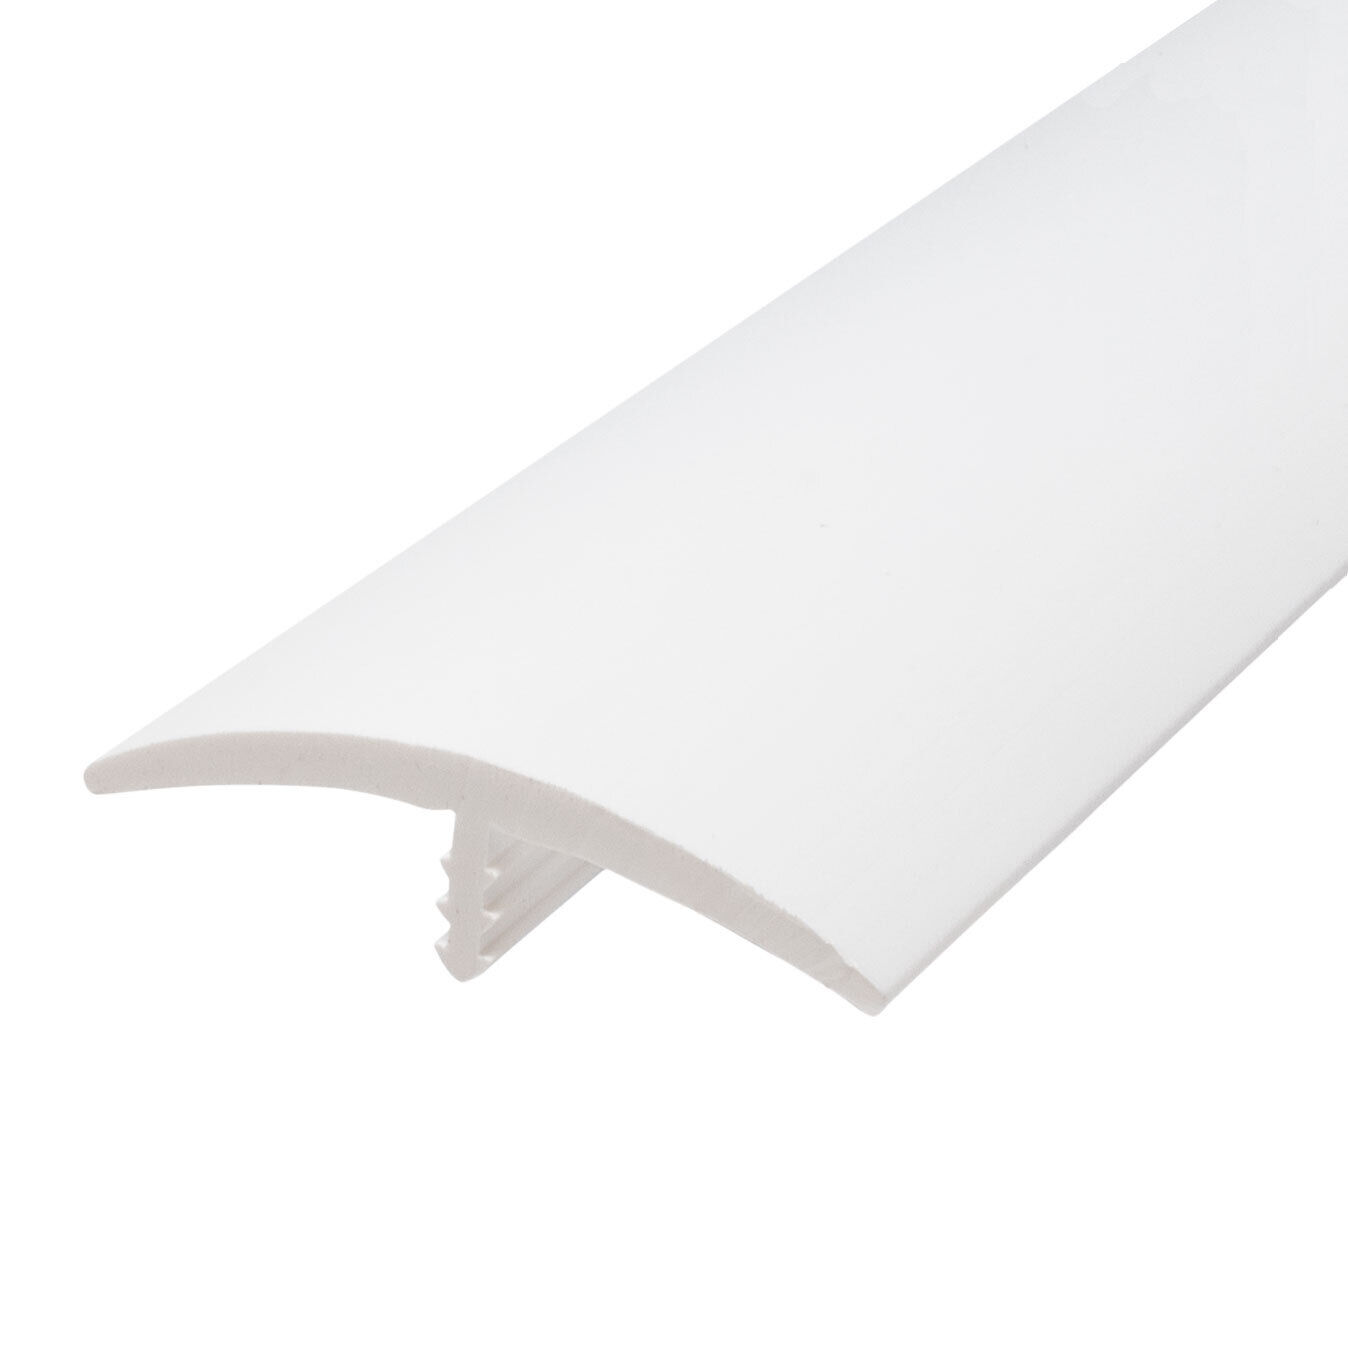 Outwater Plastic T-molding 1-1/2 Inch White Flexible Polyethylene Center Barb